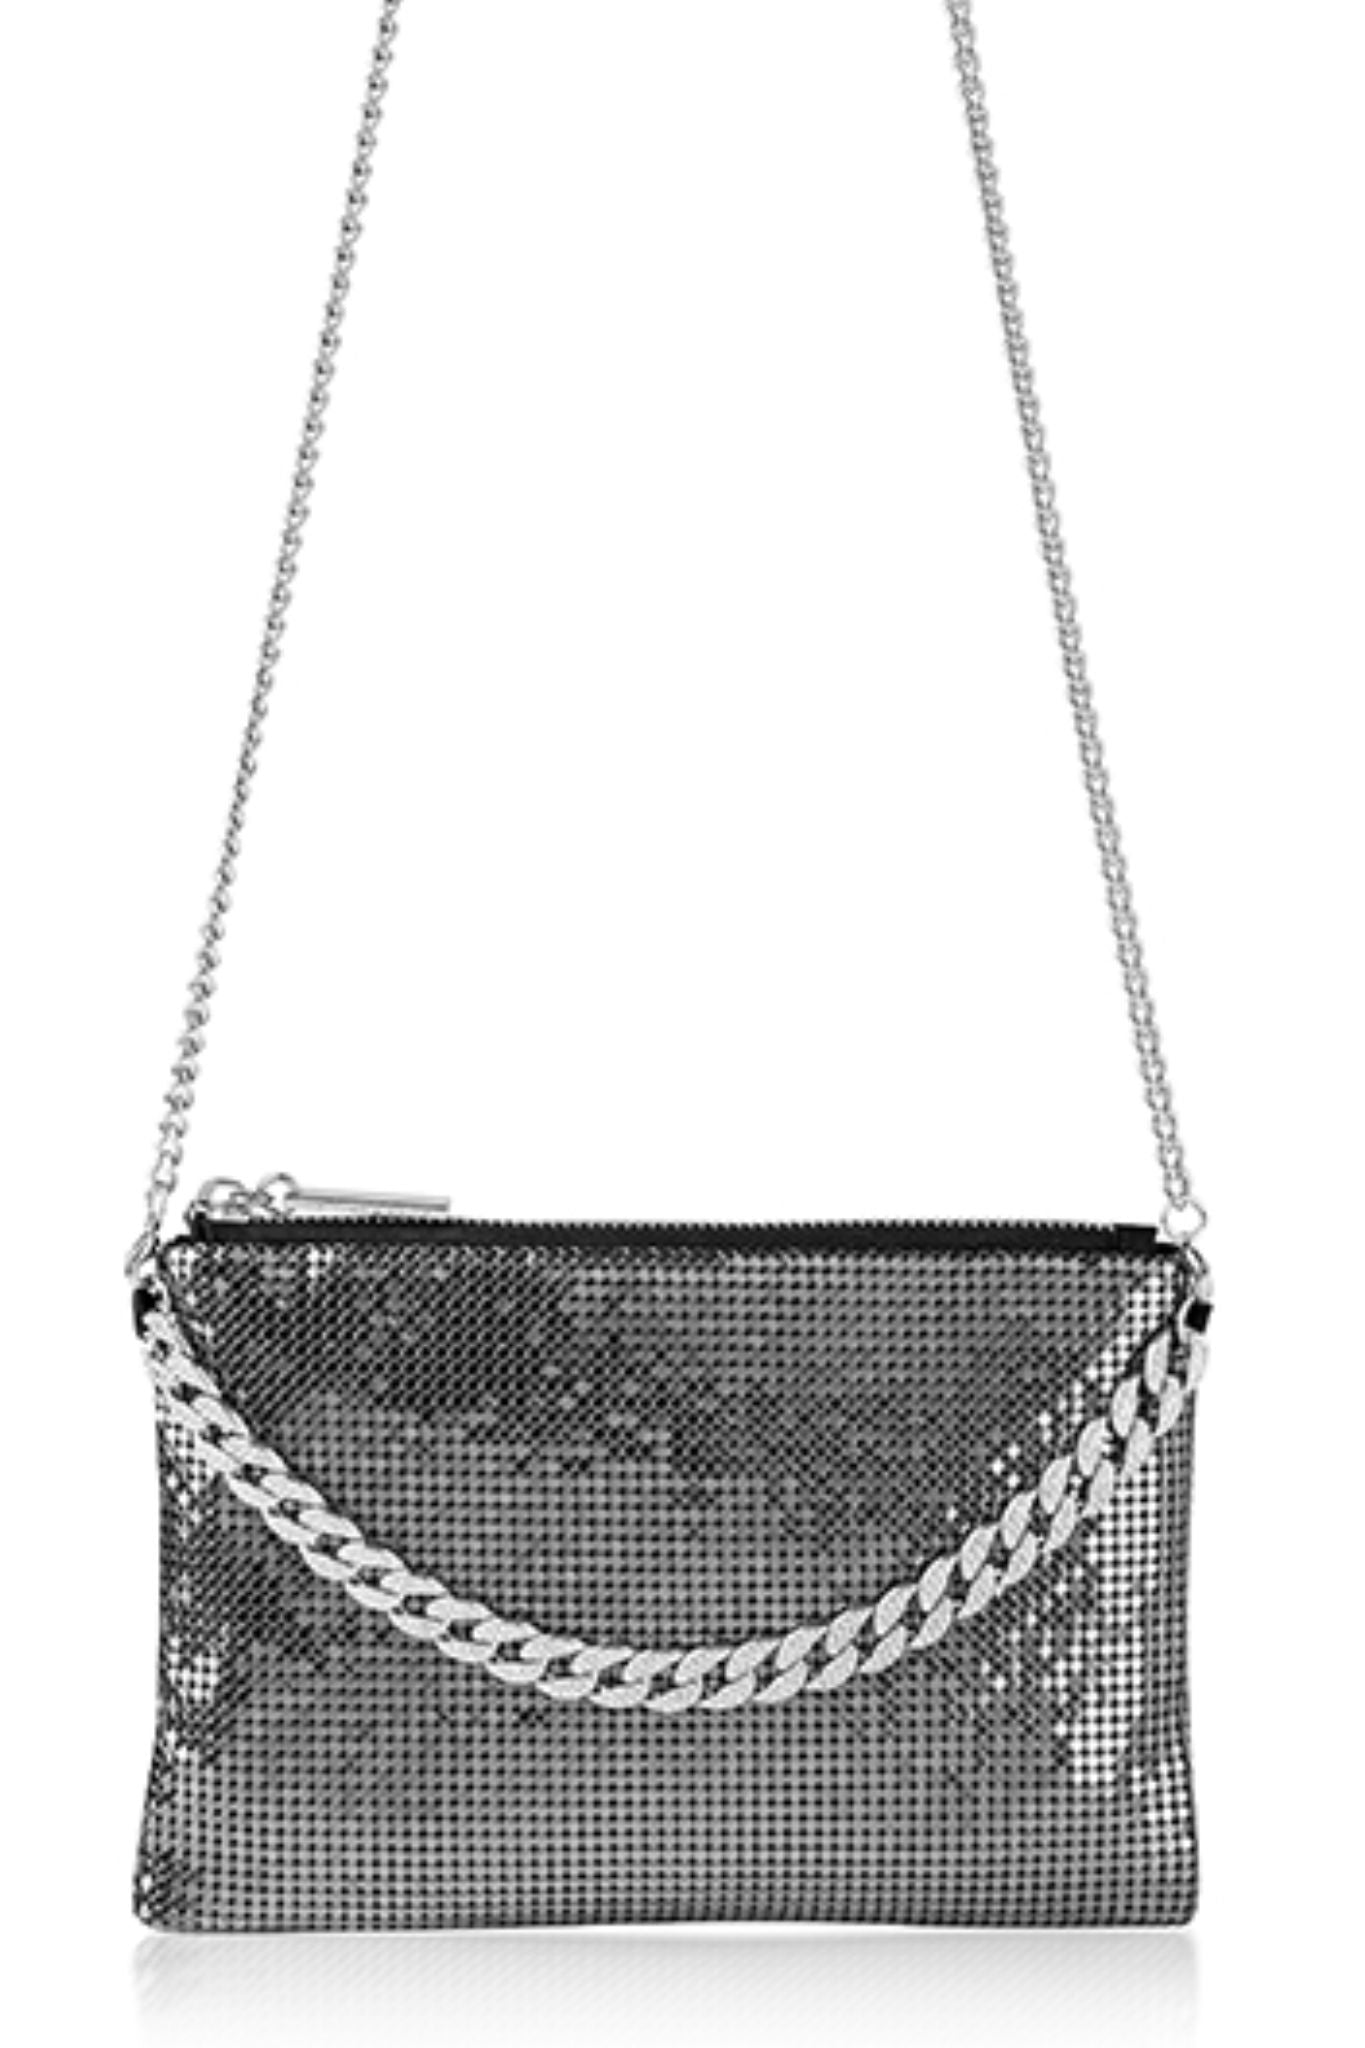 Zia Crossbody Clutch by Whiting and Davis - RENTAL